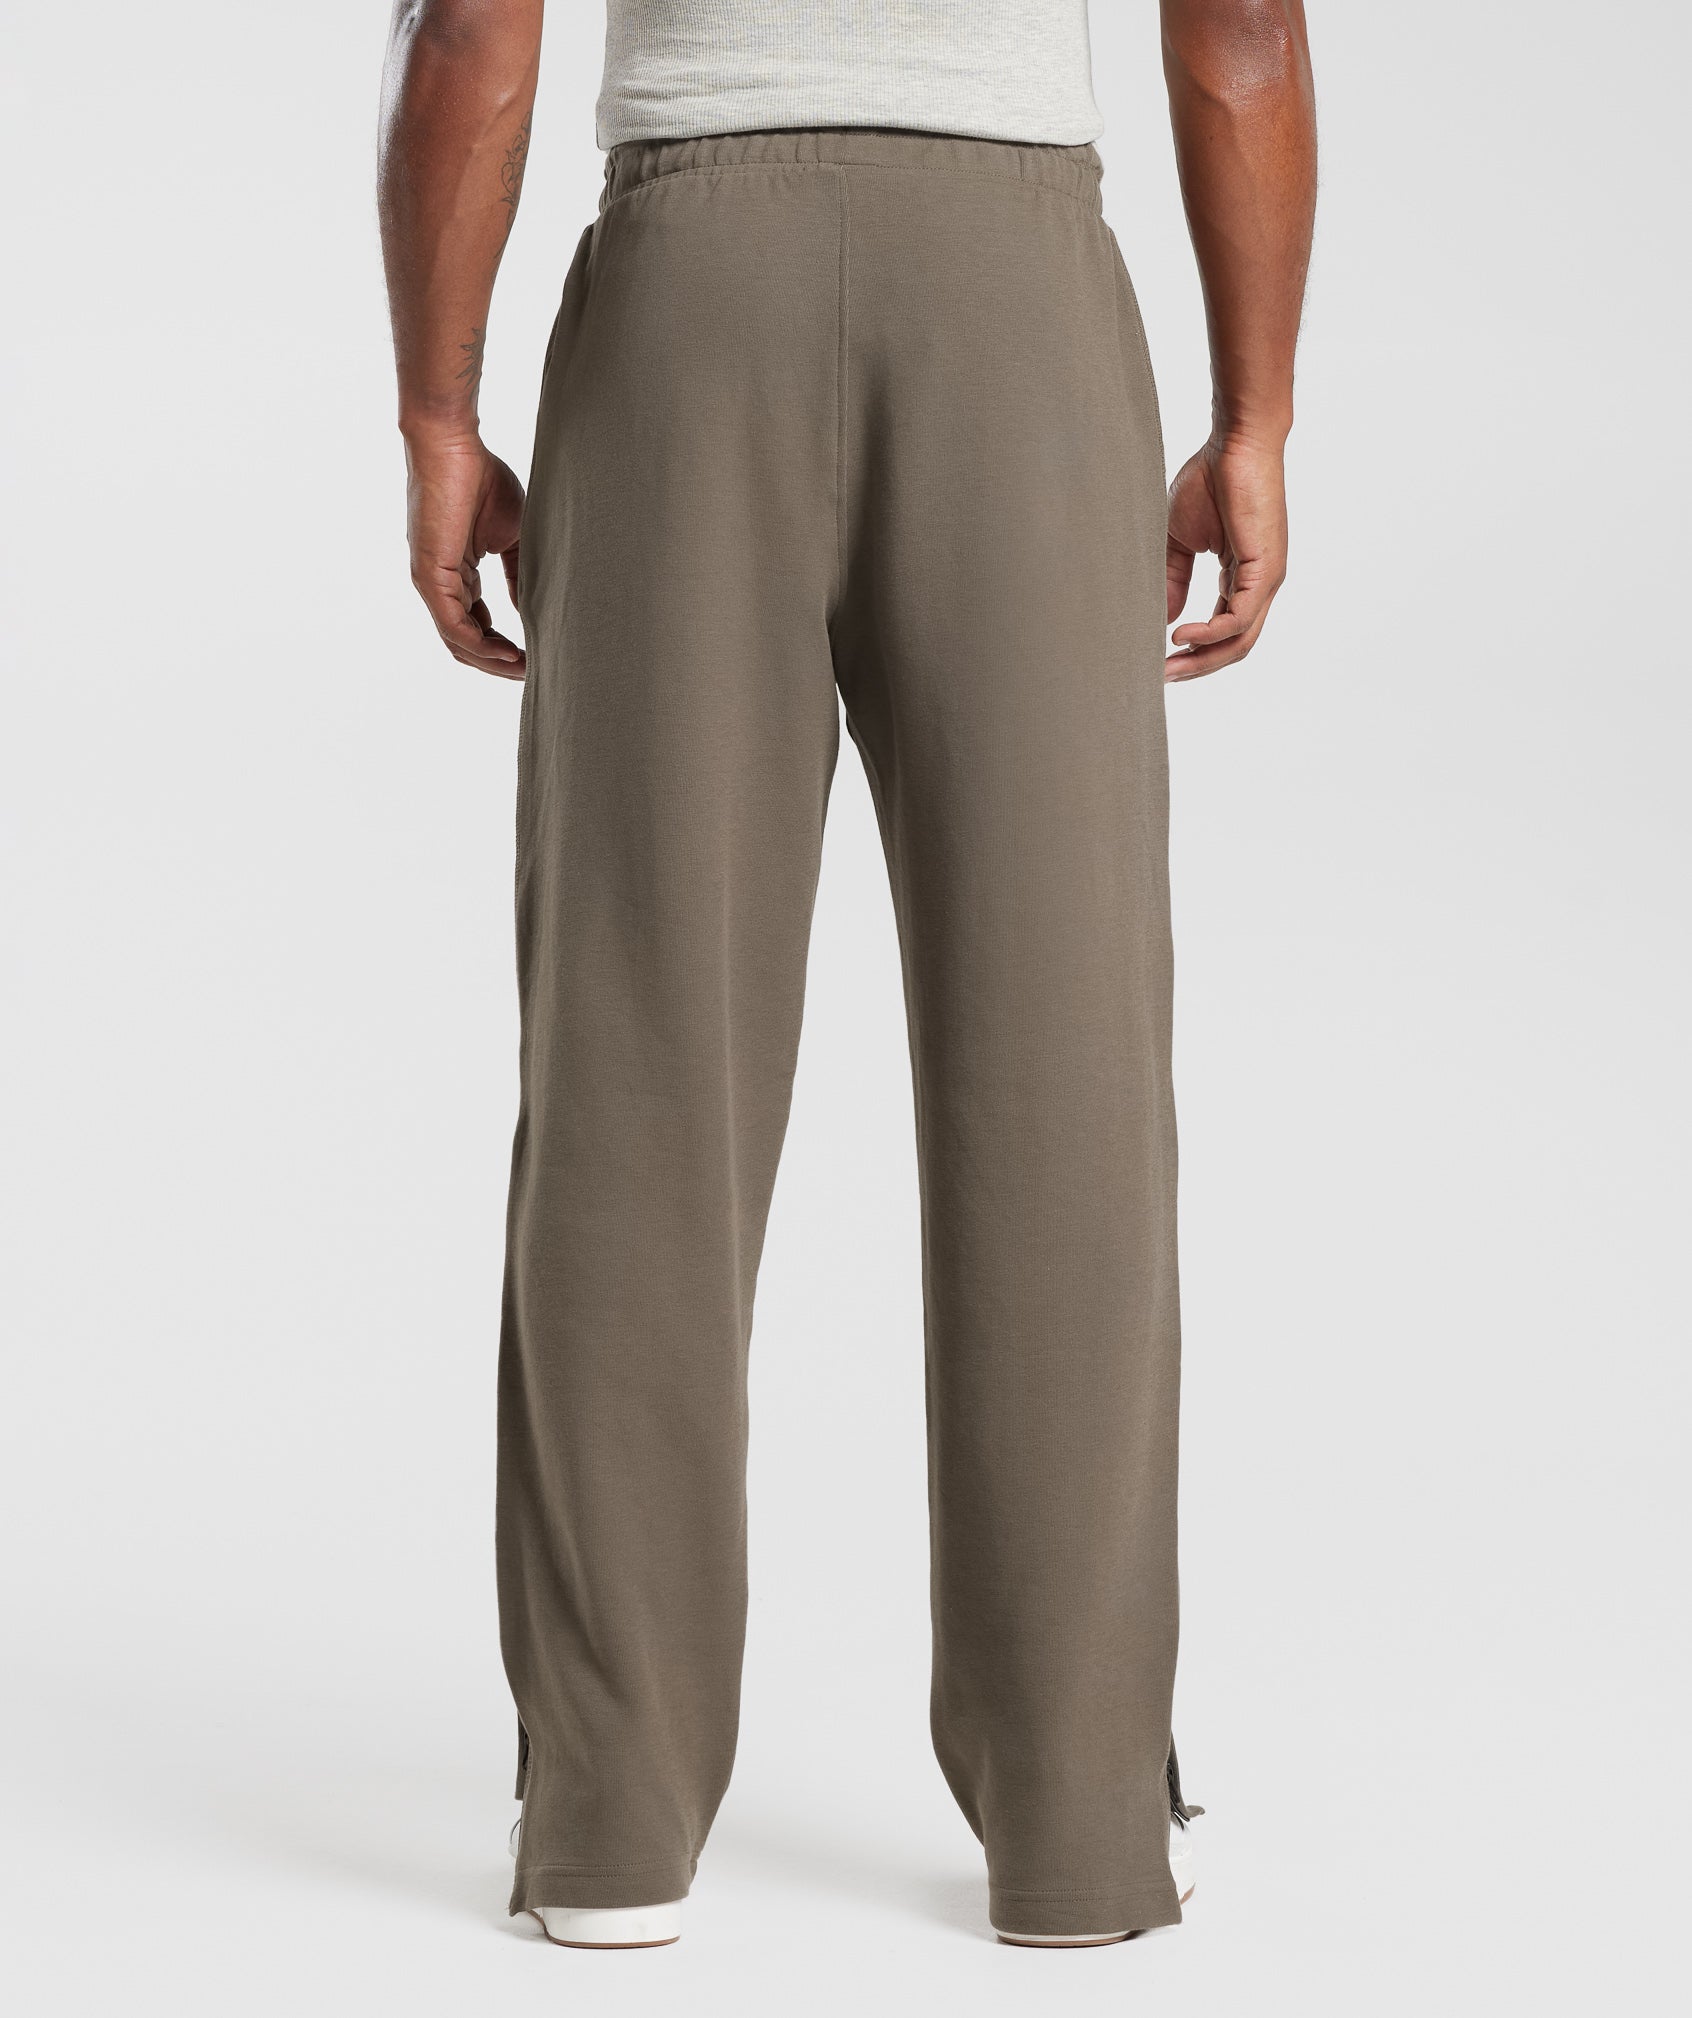 Rest Day Track Pants